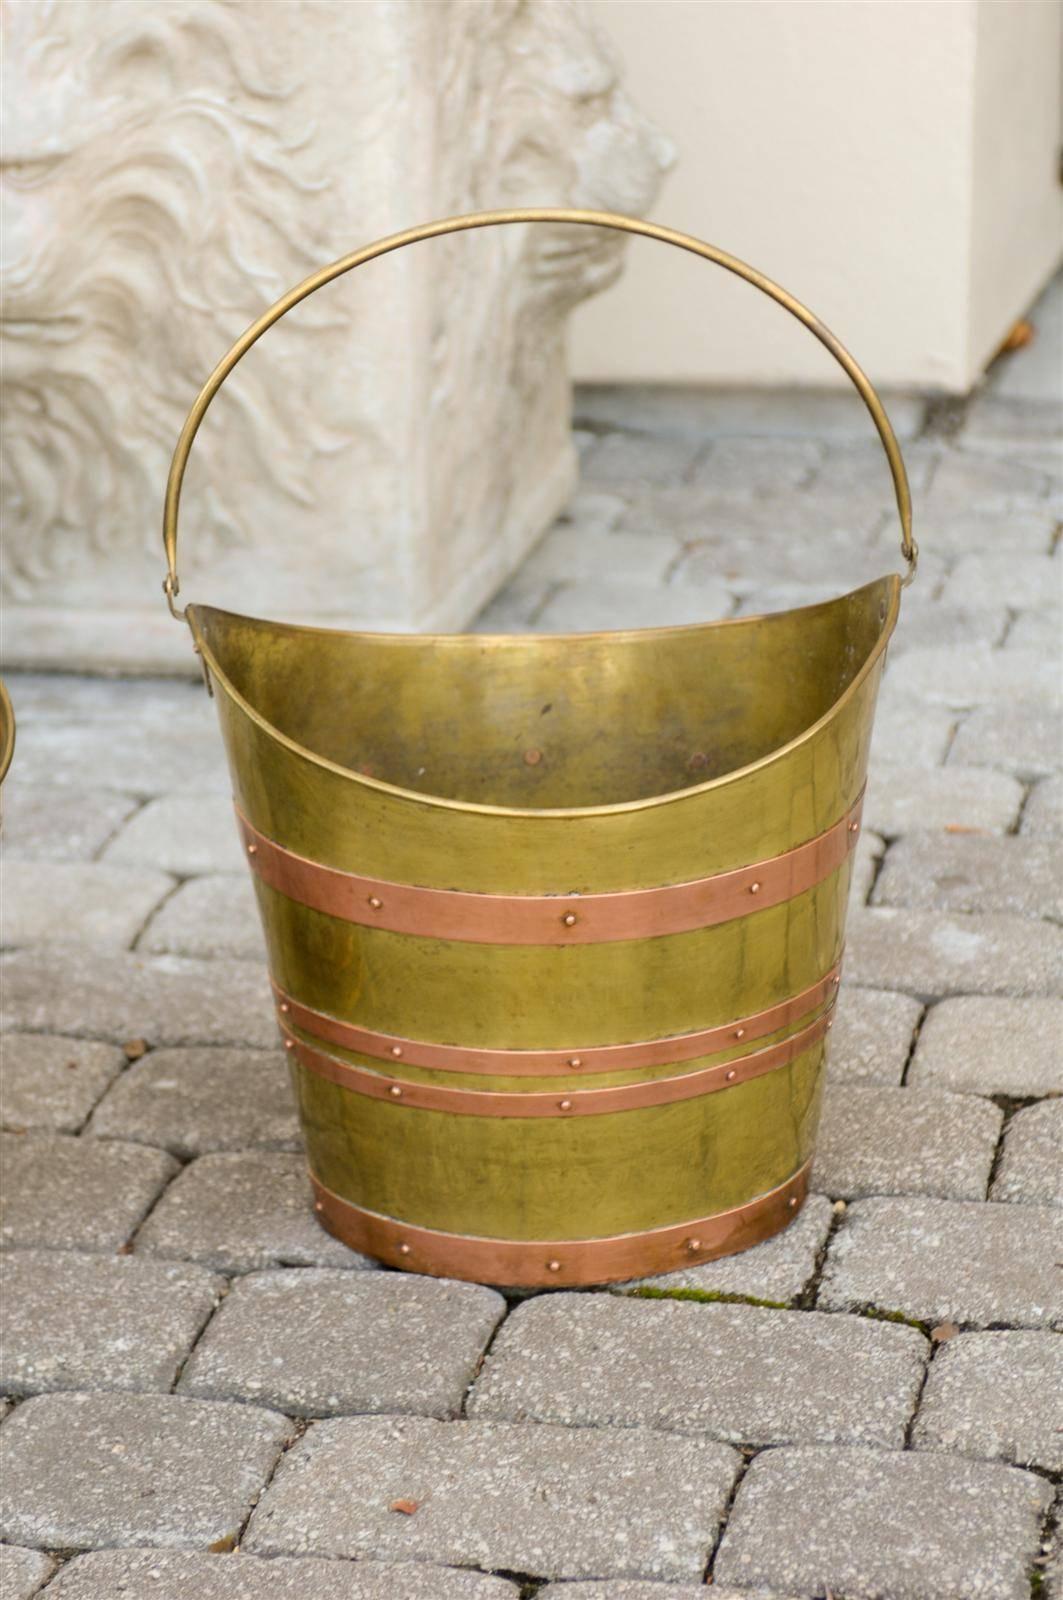 English Wide Mouth Brass Bucket with Copper Straps from the Early 20th Century For Sale 3